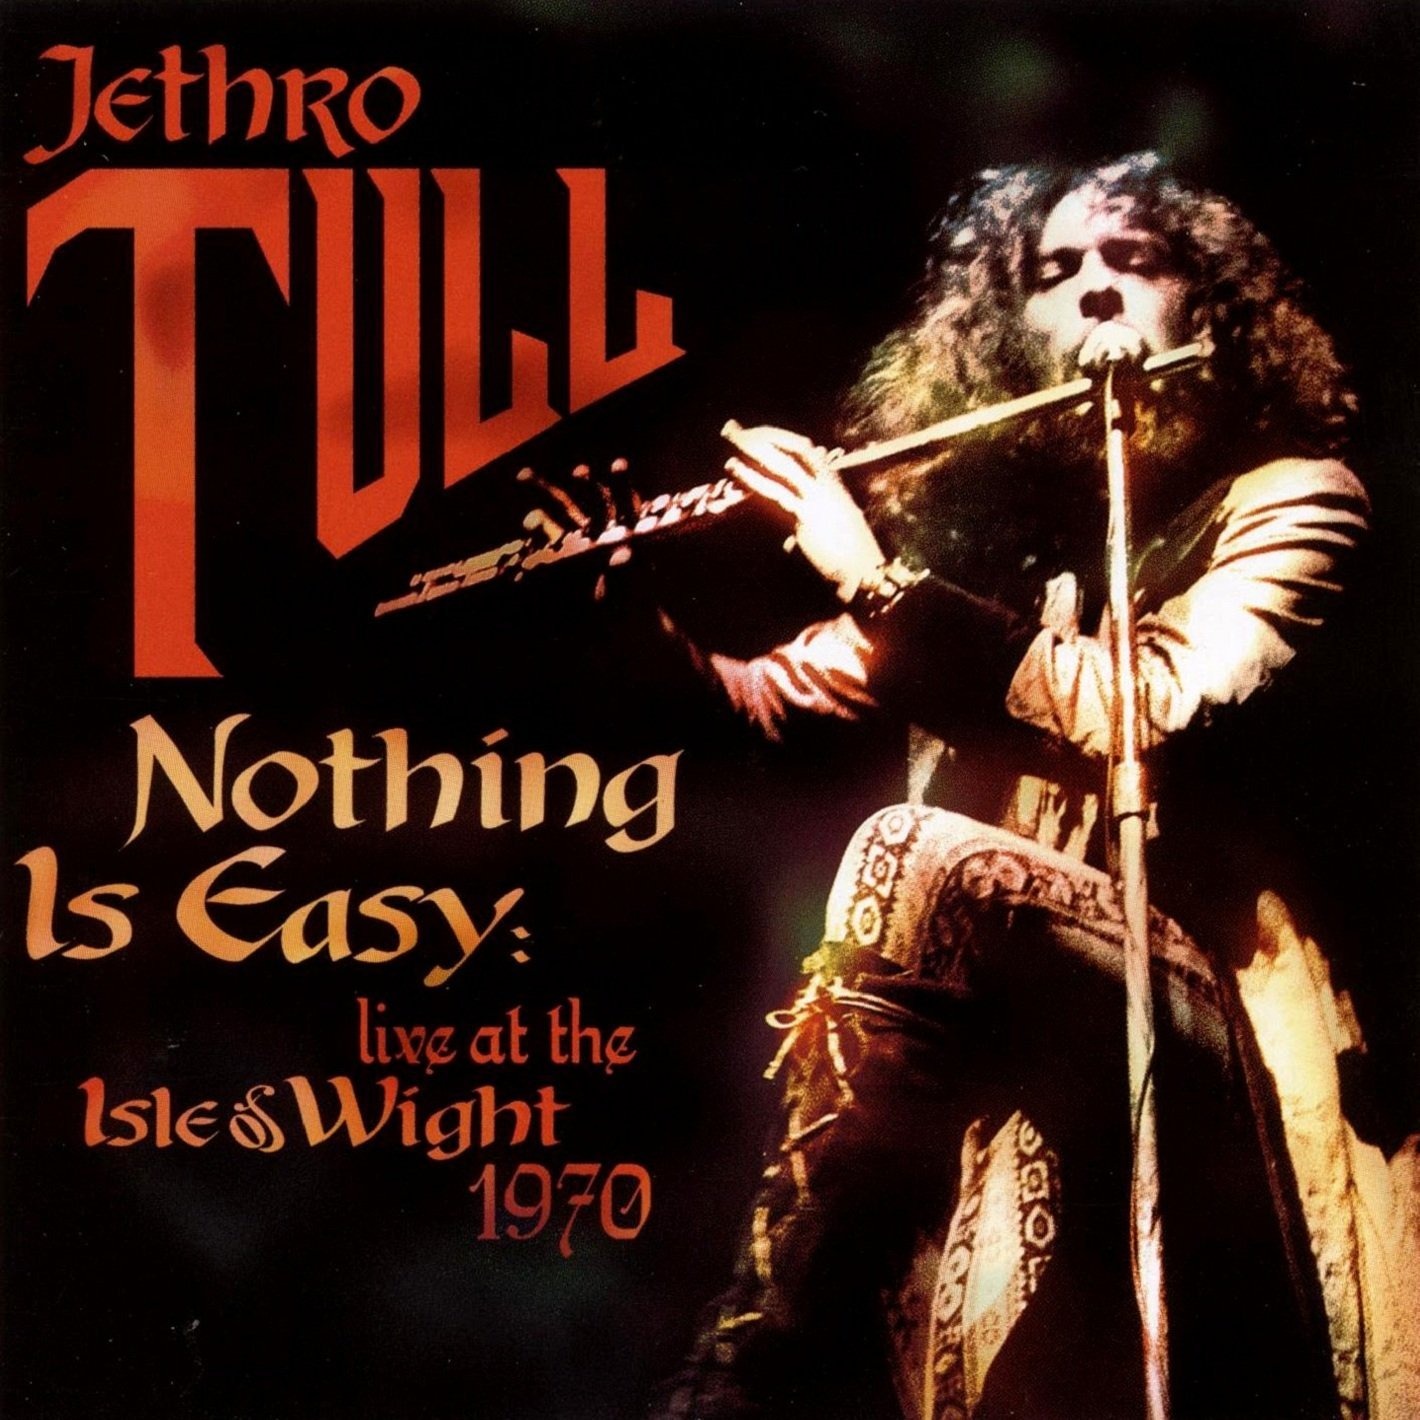 NOTHING IS EASY - LIVE AT THE ISLE OF WIGHT 1970